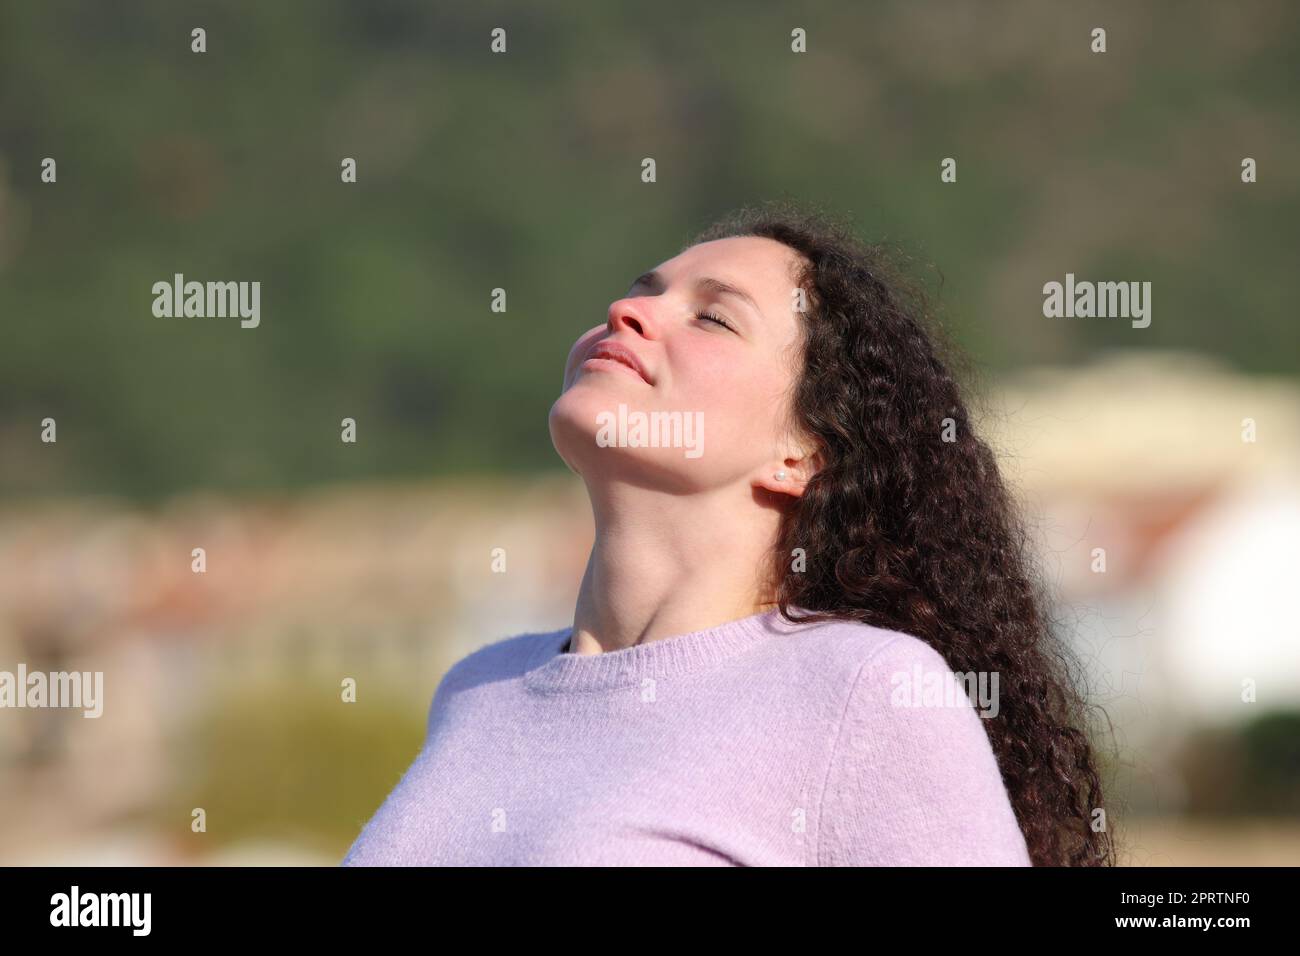 Woman with curly hair breathing fresh air Stock Photo